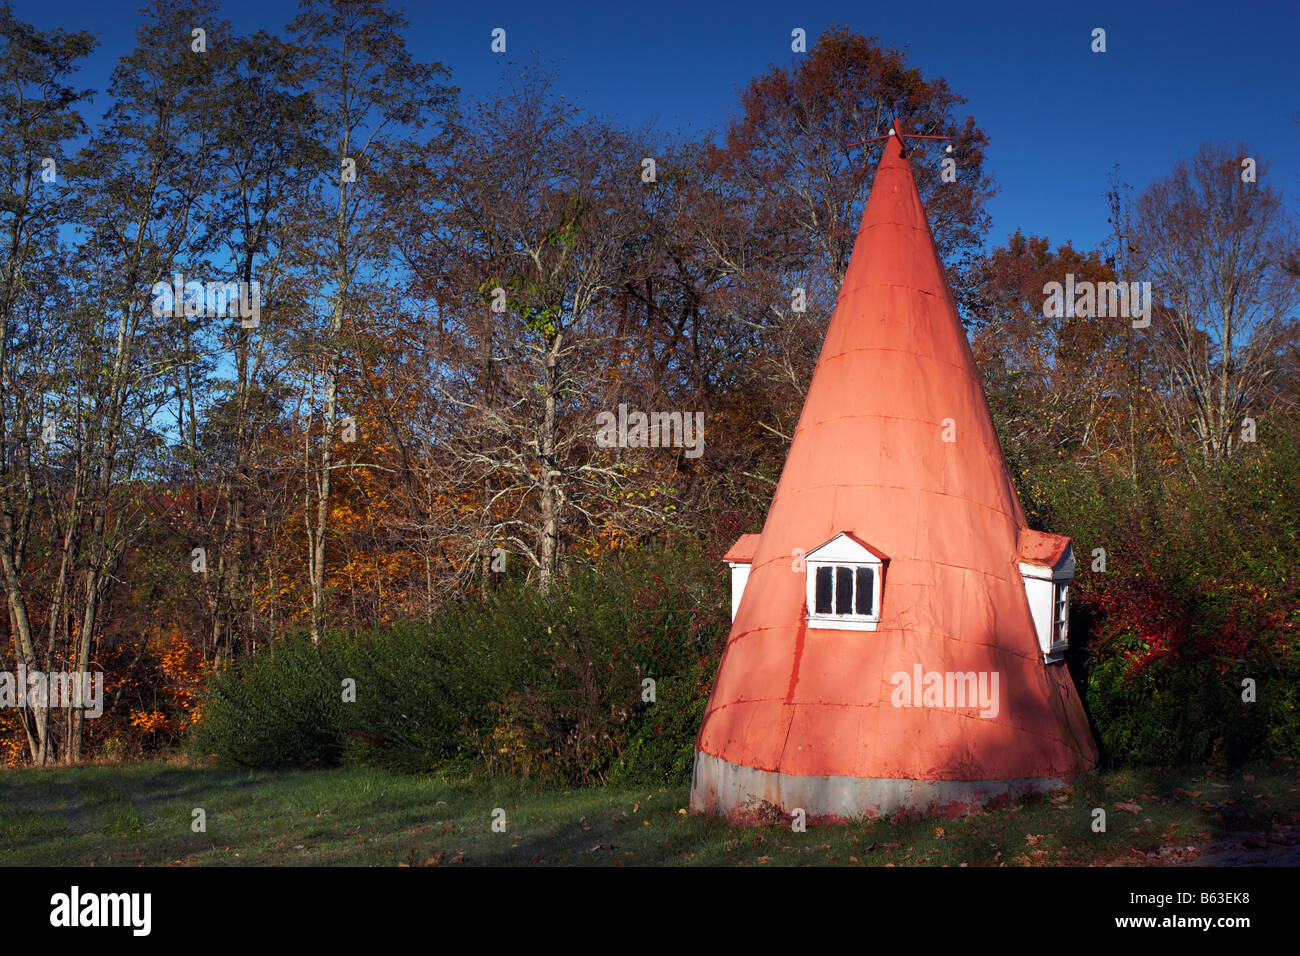 A curious structure that looks like a gnome house adjacent to the entrance driveway of a residence Stock Photo